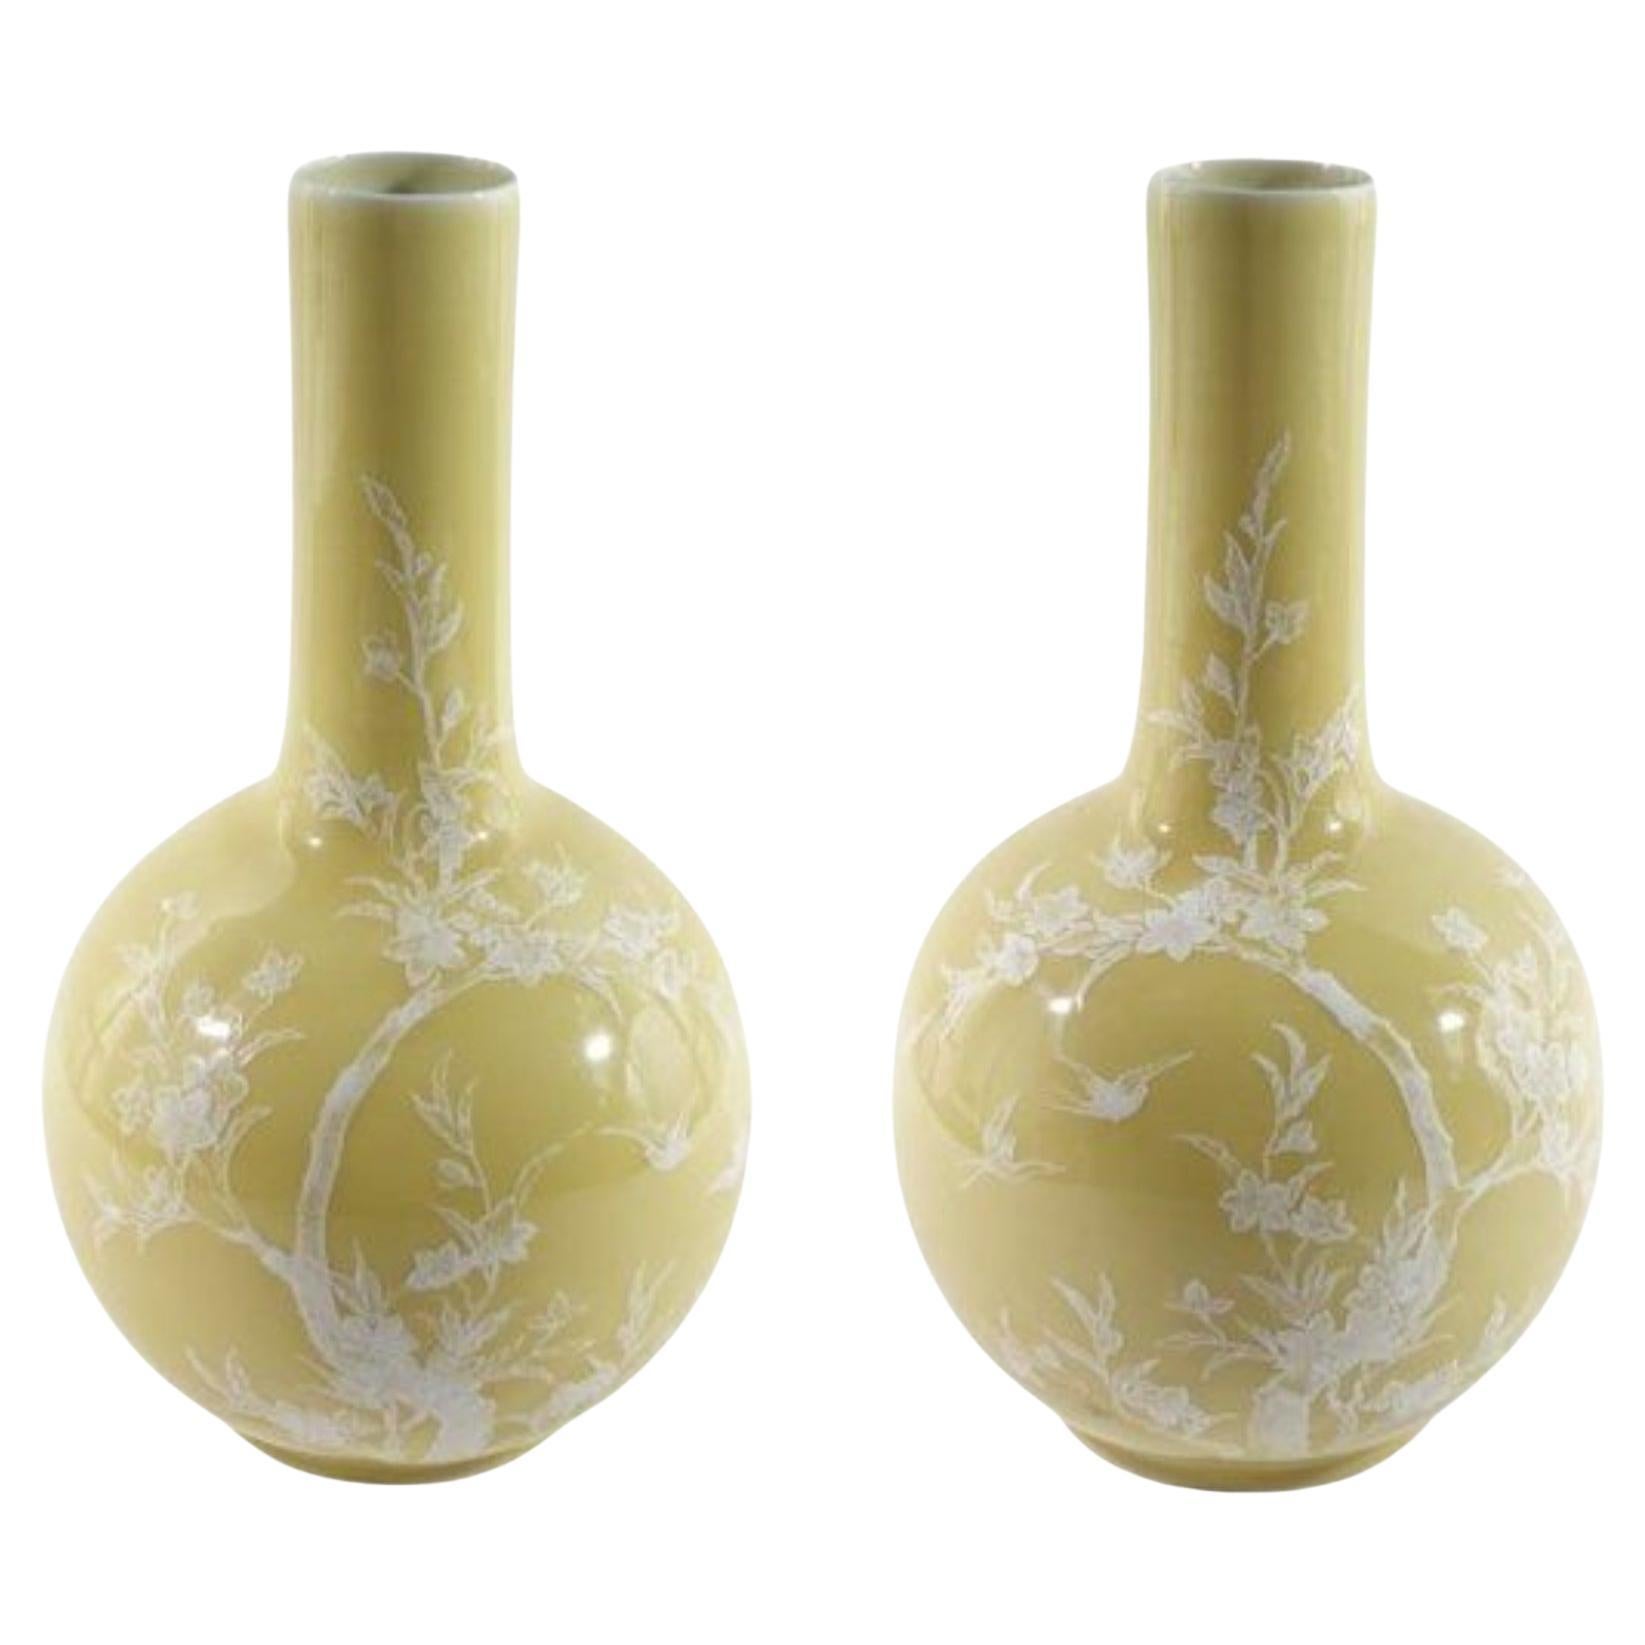 Pair of Beautiful Gold and White Chinese Midcentury Porcelain Vases